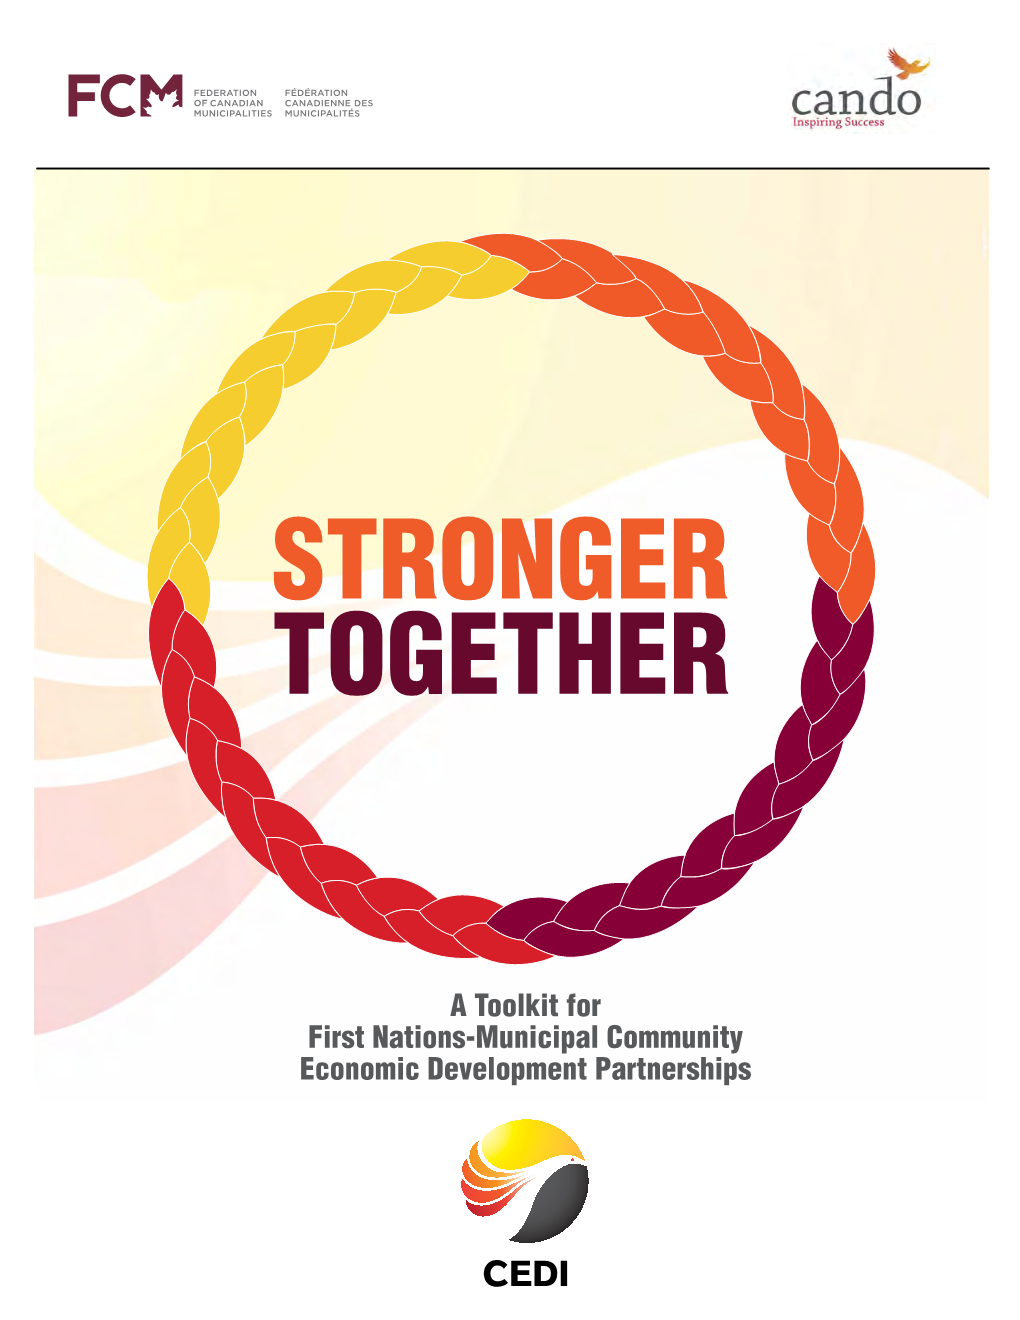 Stronger Together: a Toolkit for First Nations-Municipal Community Economic Development